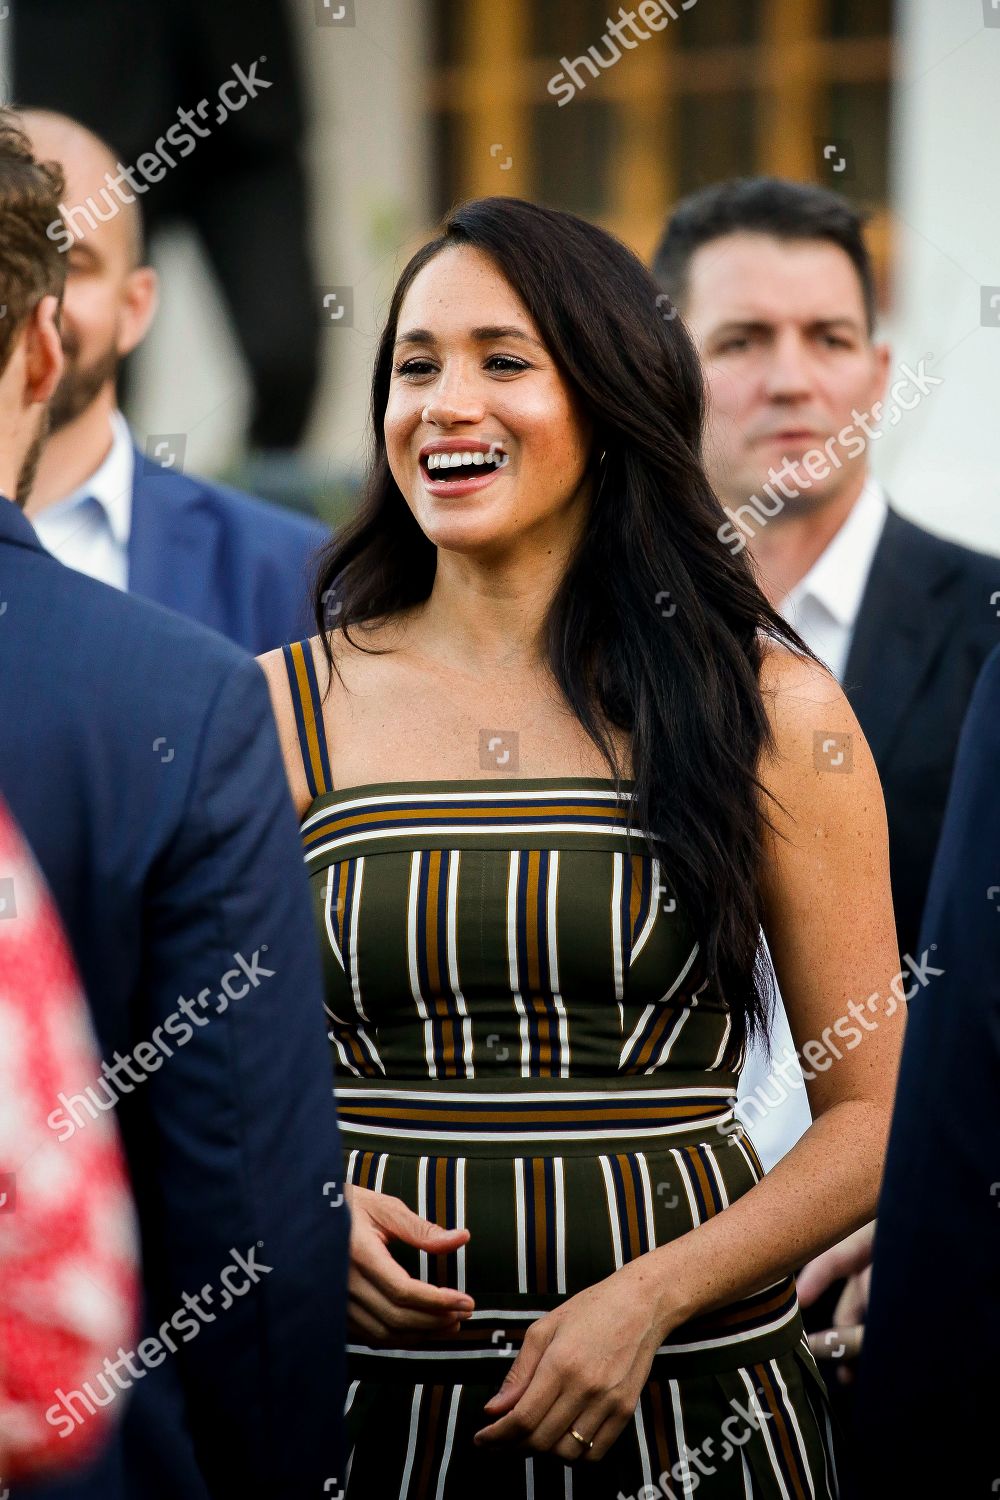 prince-harry-and-meghan-duchess-of-sussex-visit-to-africa-shutterstock-editorial-10423103c.jpg